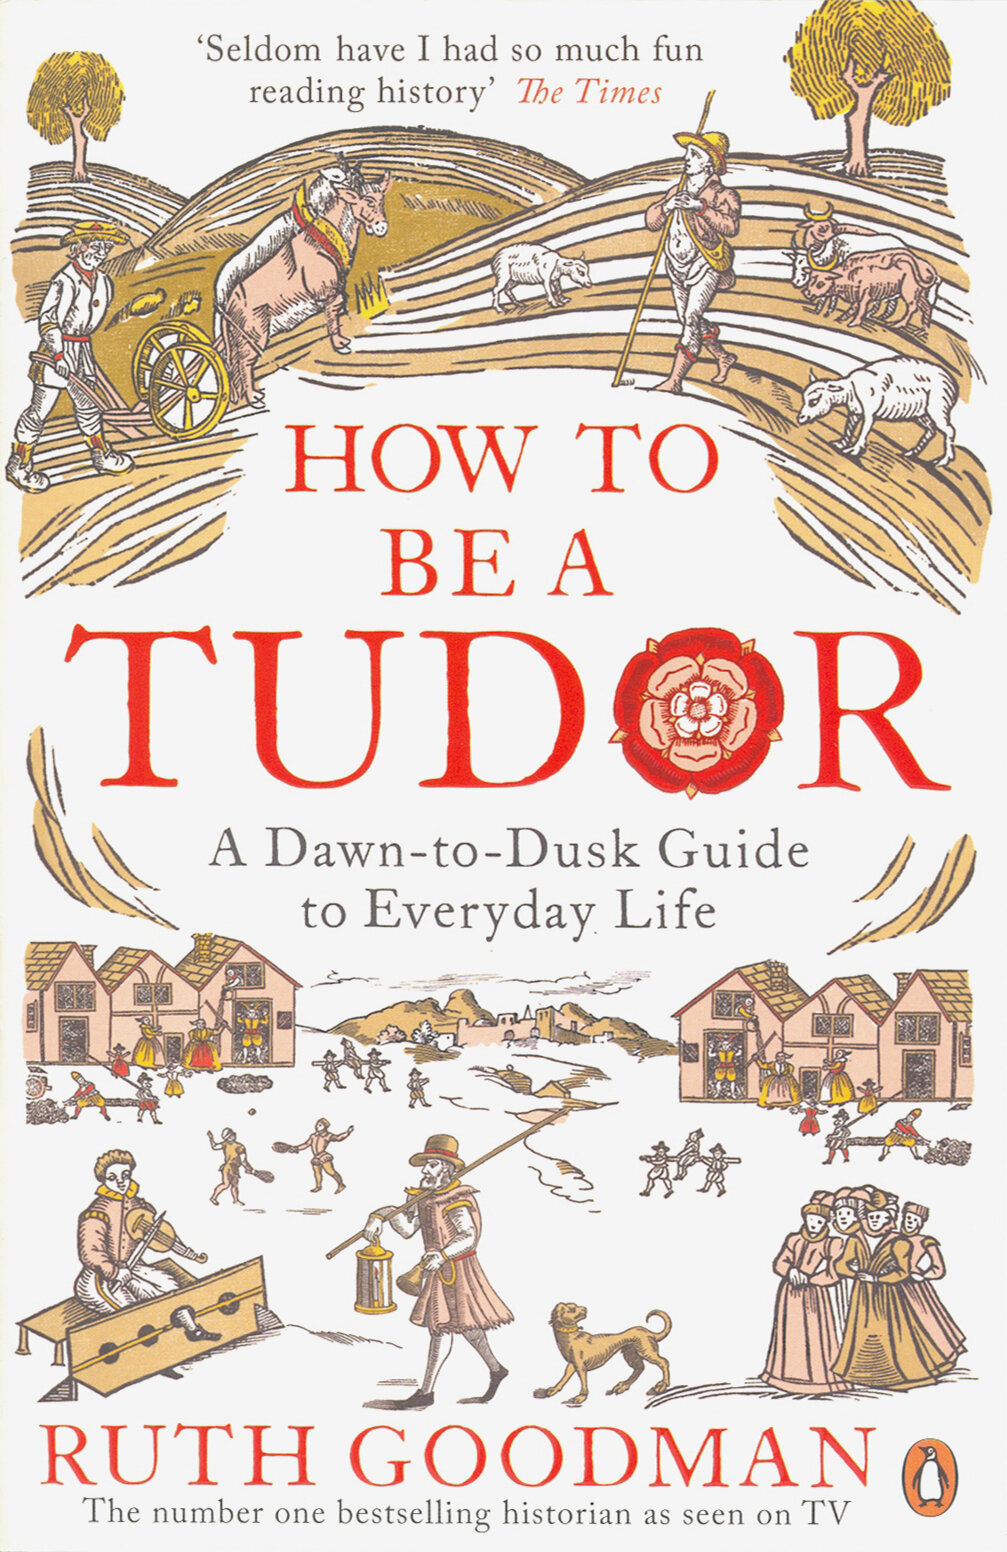 How to be a Tudor. Dawn-to-Dusk Guide to Everyday Life - фото №1